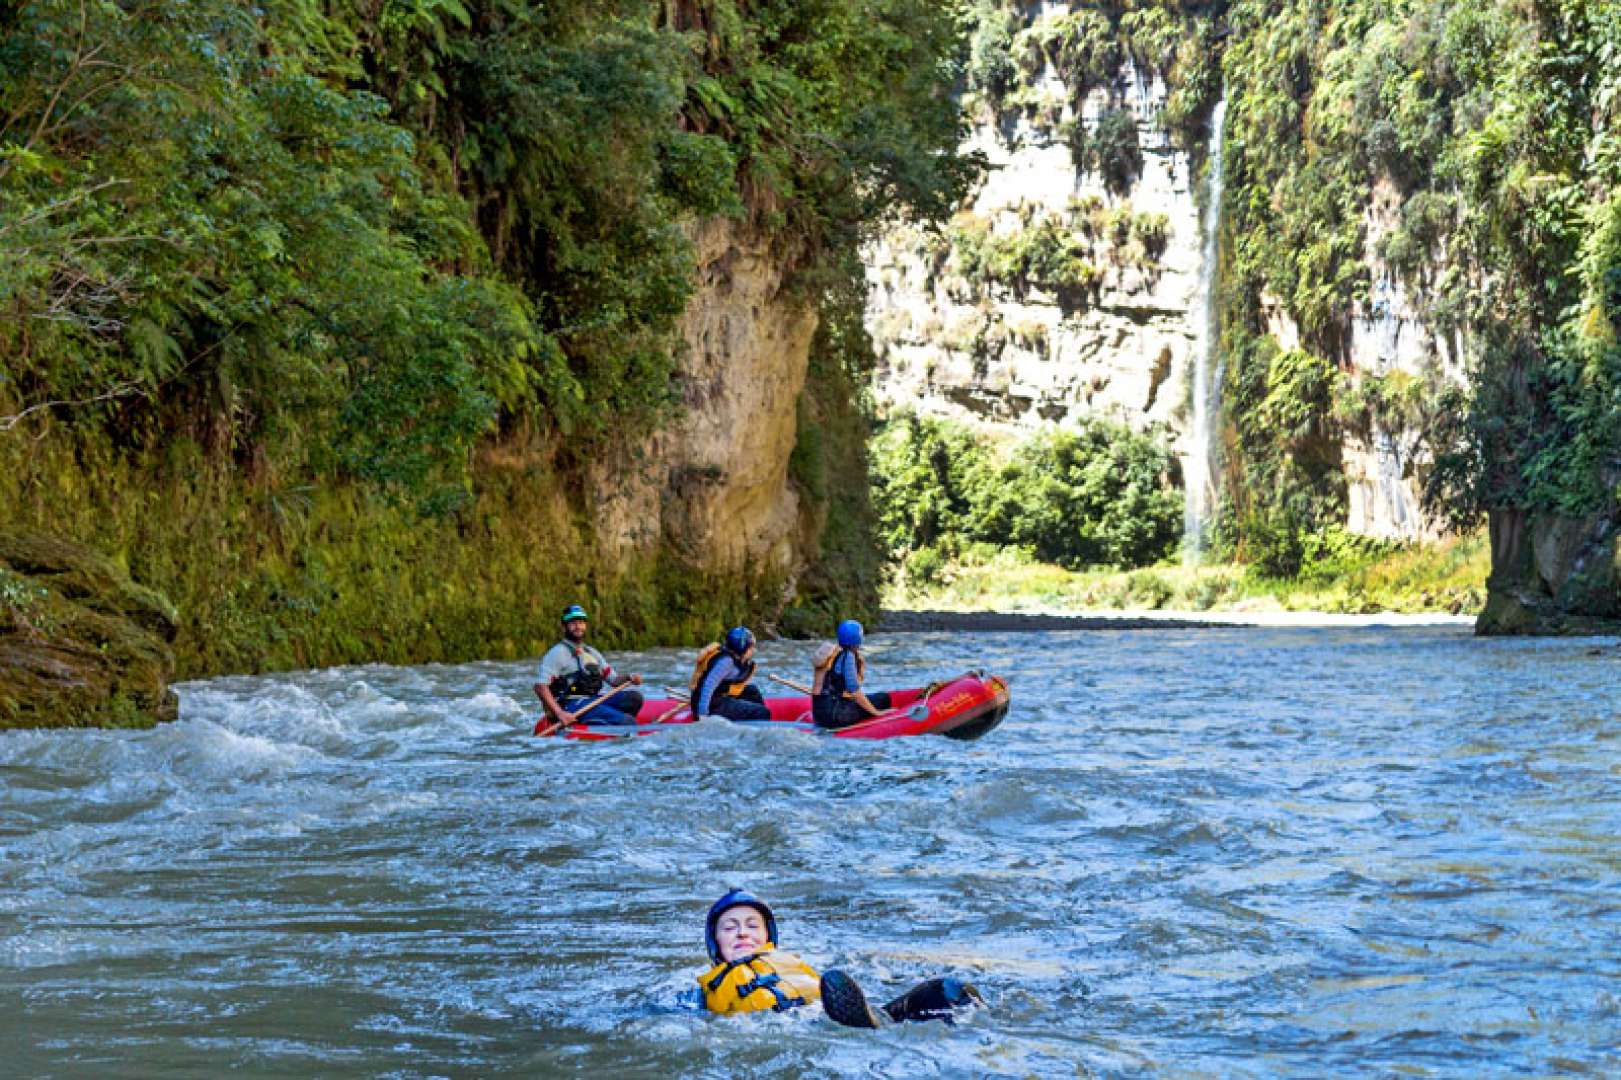 Rafting with over 30 Grade 2 (easy) rapids, the 13 km scenic section of the Rangitikei River